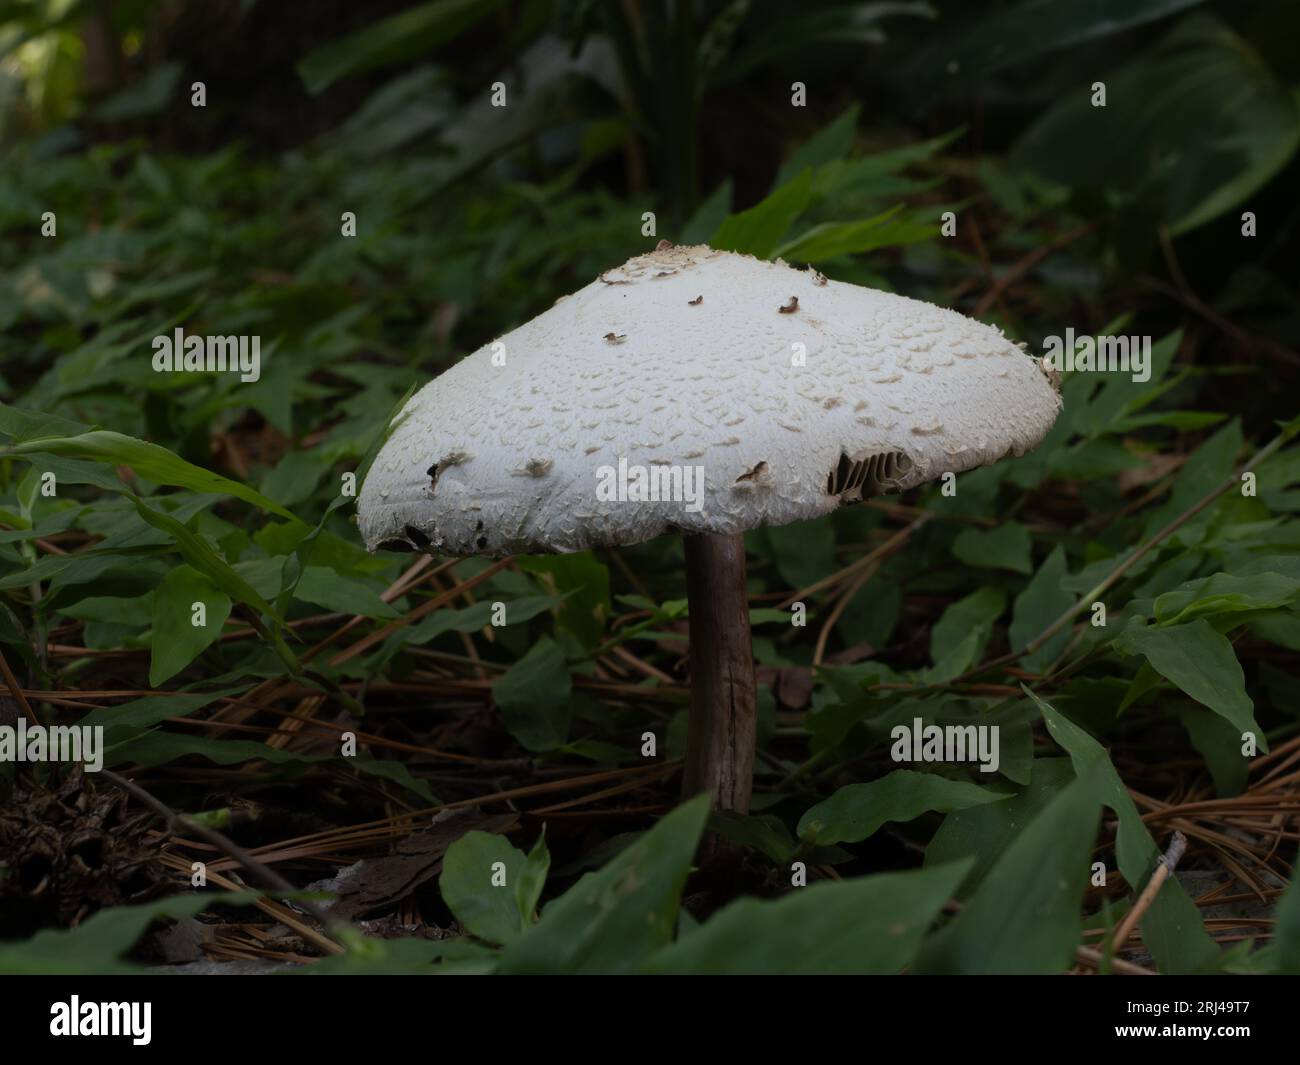 Toxic False Parasol or Chlorophyllum molybdites mushroom that causes vomiting. Photographed on forest floor surrounded by green leaves. Stock Photo